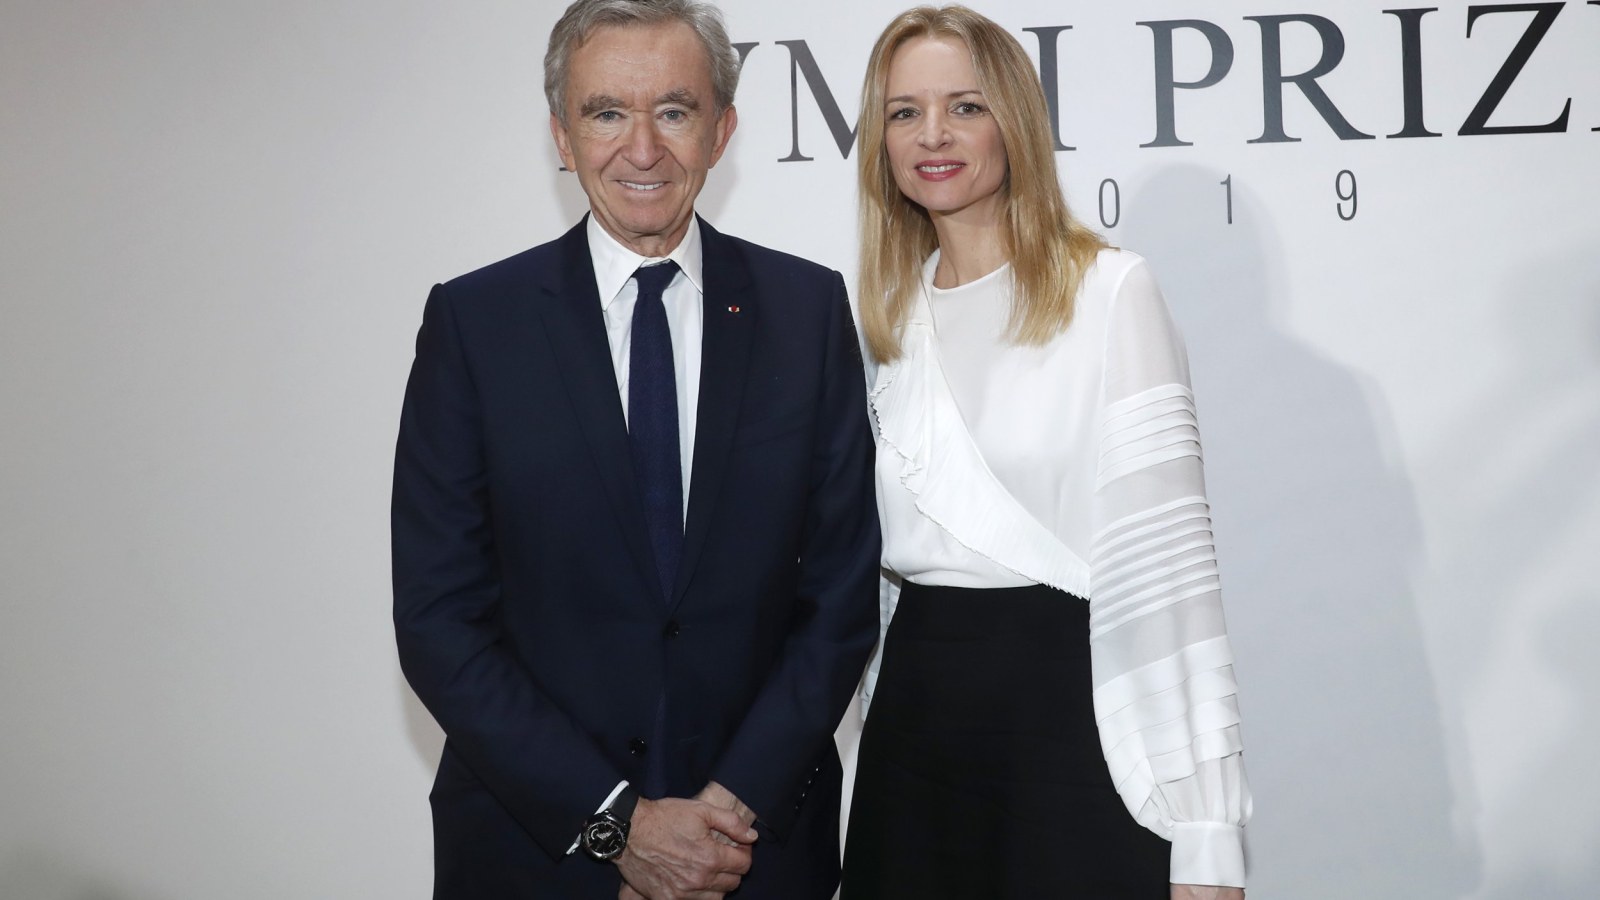 What Bernard Arnault saw as potential is now your new Greenbelt